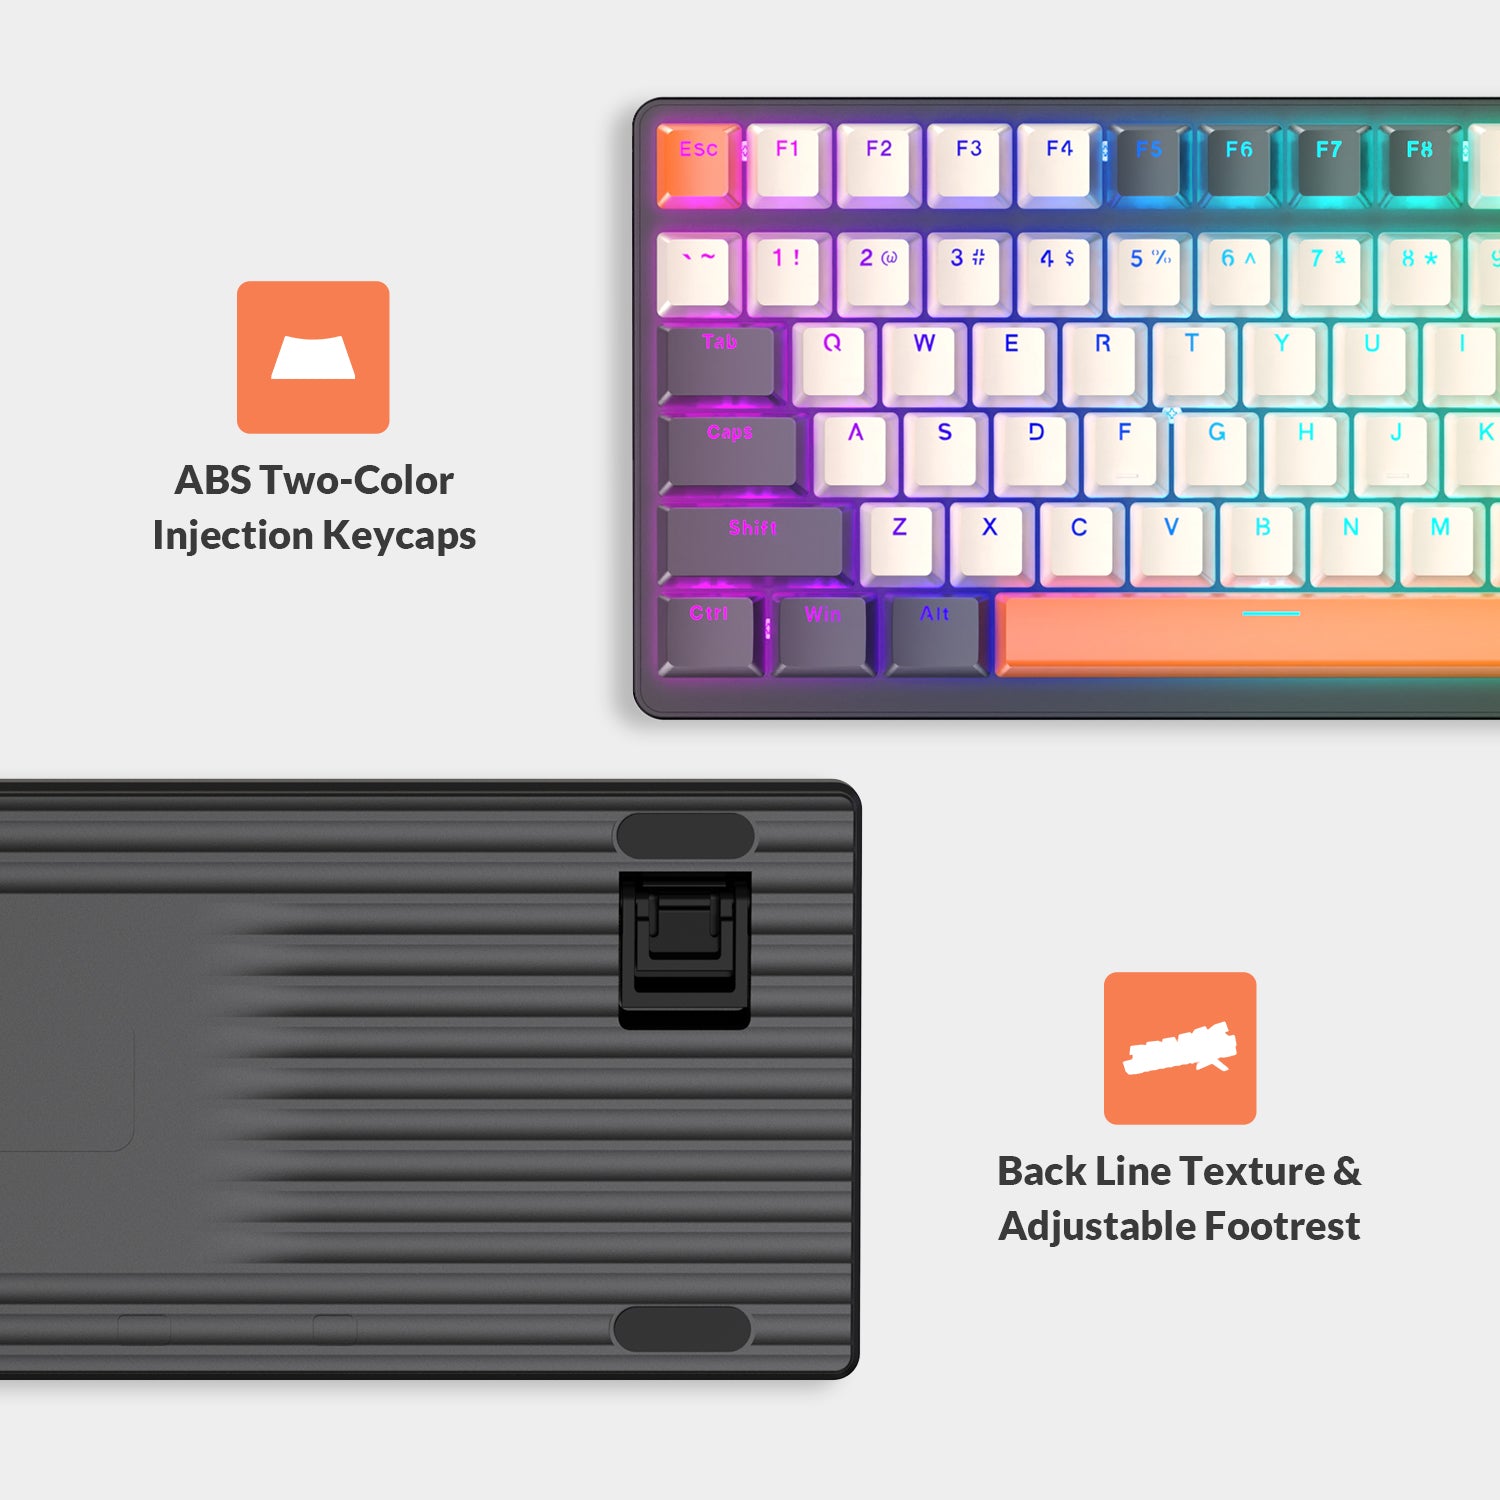 ZIYOU LANG K3 Mechanical Keyboard Ultra-Compact Mini 98-Key Wired Type C USB Water-resistant RGB Illuminated Clicky Linear Switch